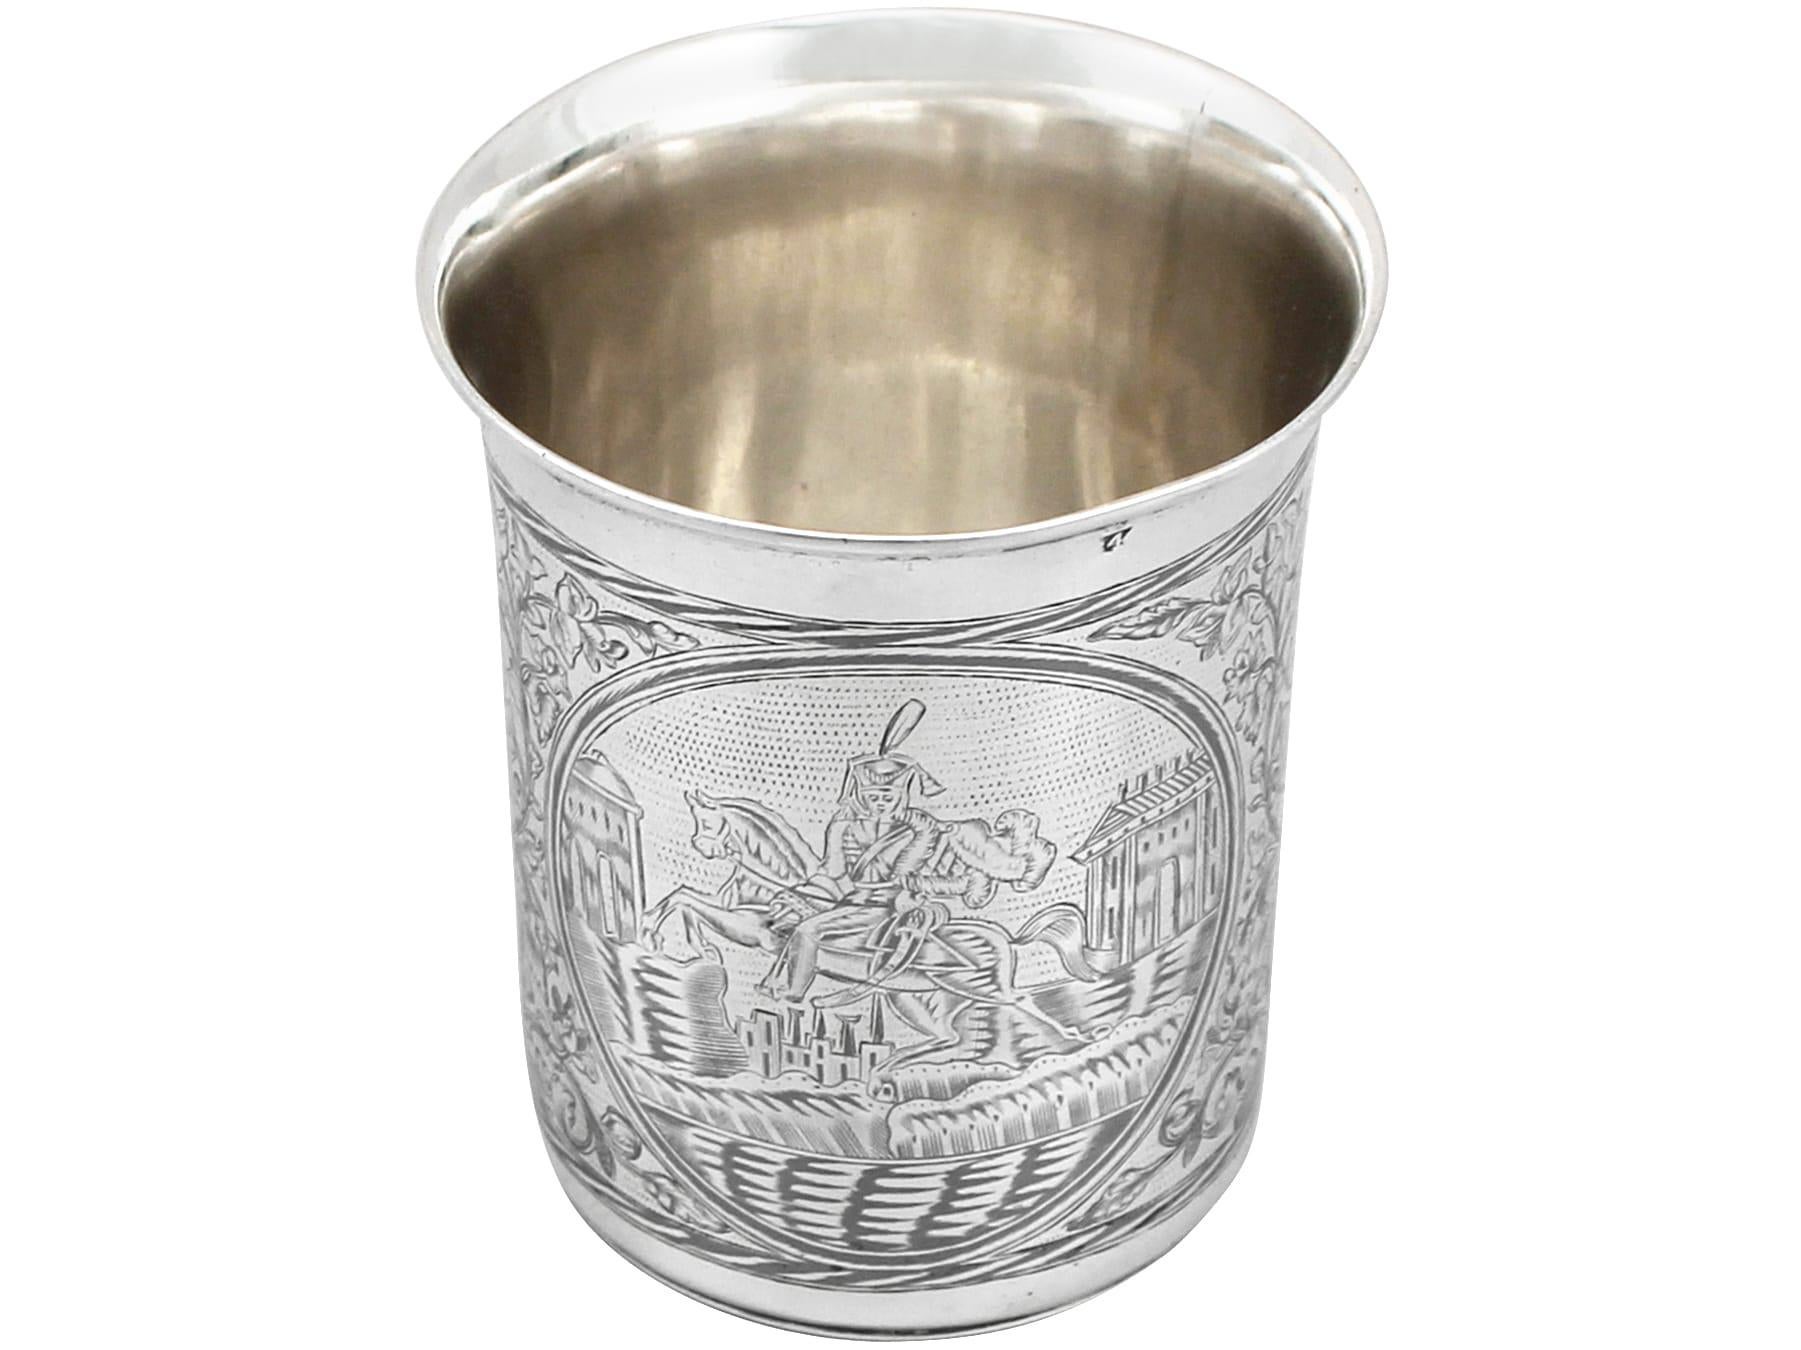 An exceptional, fine and impressive antique Russian niello enamel and silver beaker; an addition to our range of drinks related silverware.

This antique Russian silver beaker has a tapering cylindrical form with a flared rim.

The body of this